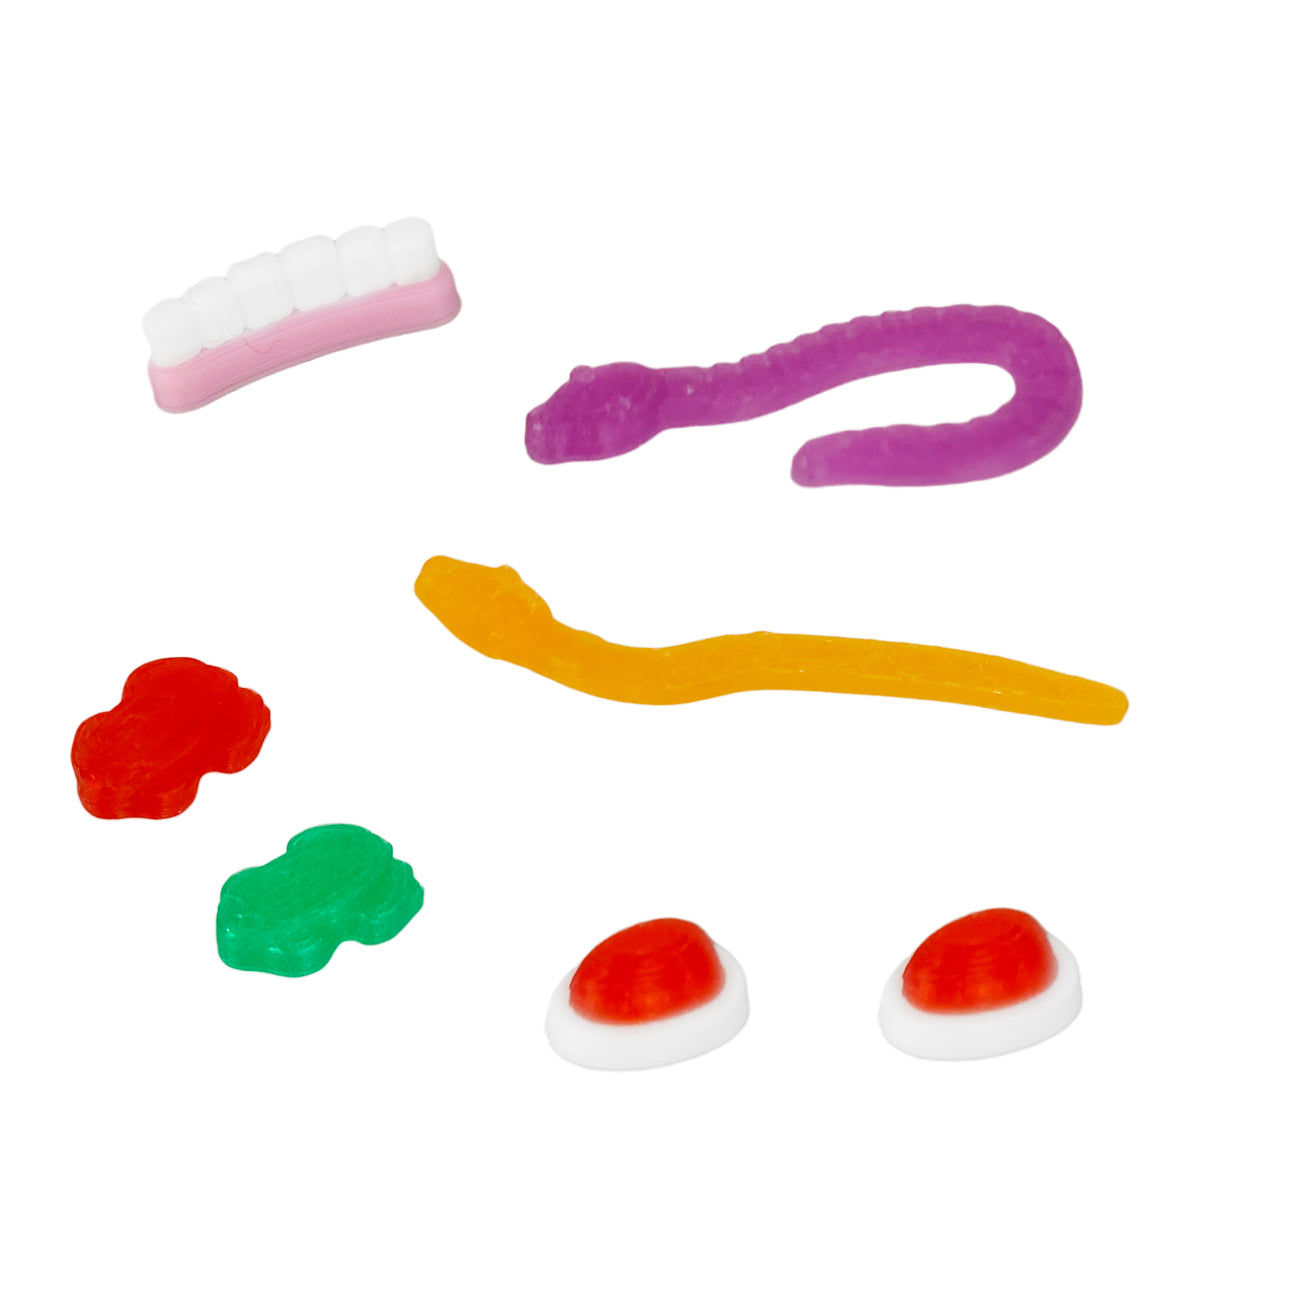 Lollies pack miniature snakes, miniature teeth, green and red frogs with strawberry and cream lollies Elf food props By My Magical Moments